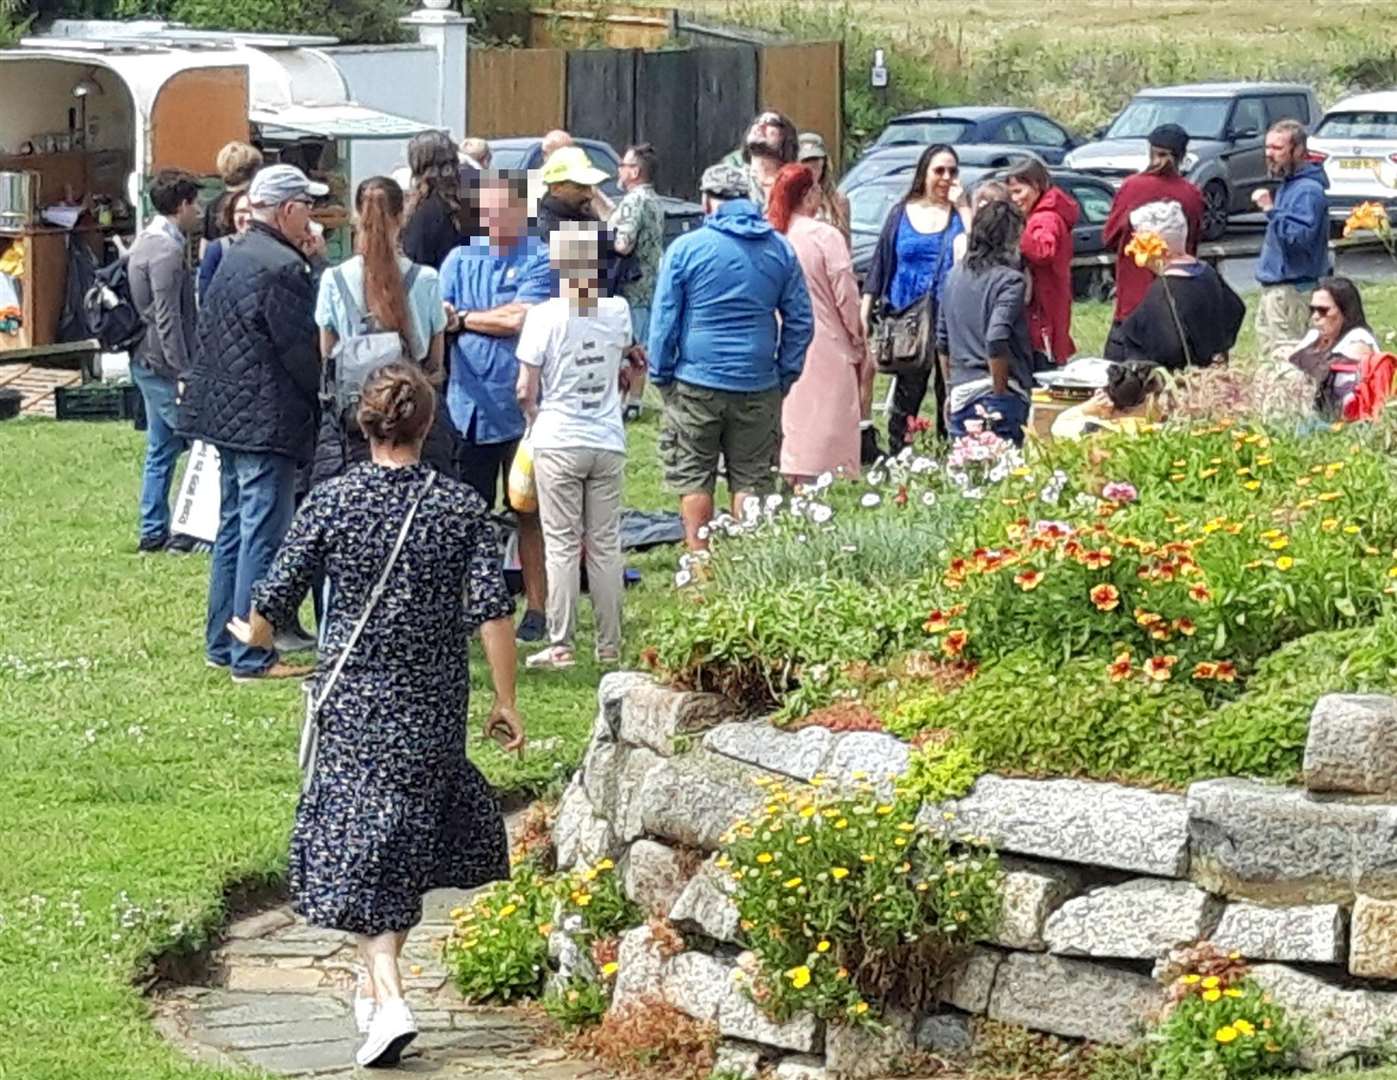 People against vaccine passports and jabs for kids gathered at Sandown Castle Community Garden allegedly 'spoiled the essence' of the site in what was described as "an invasion".